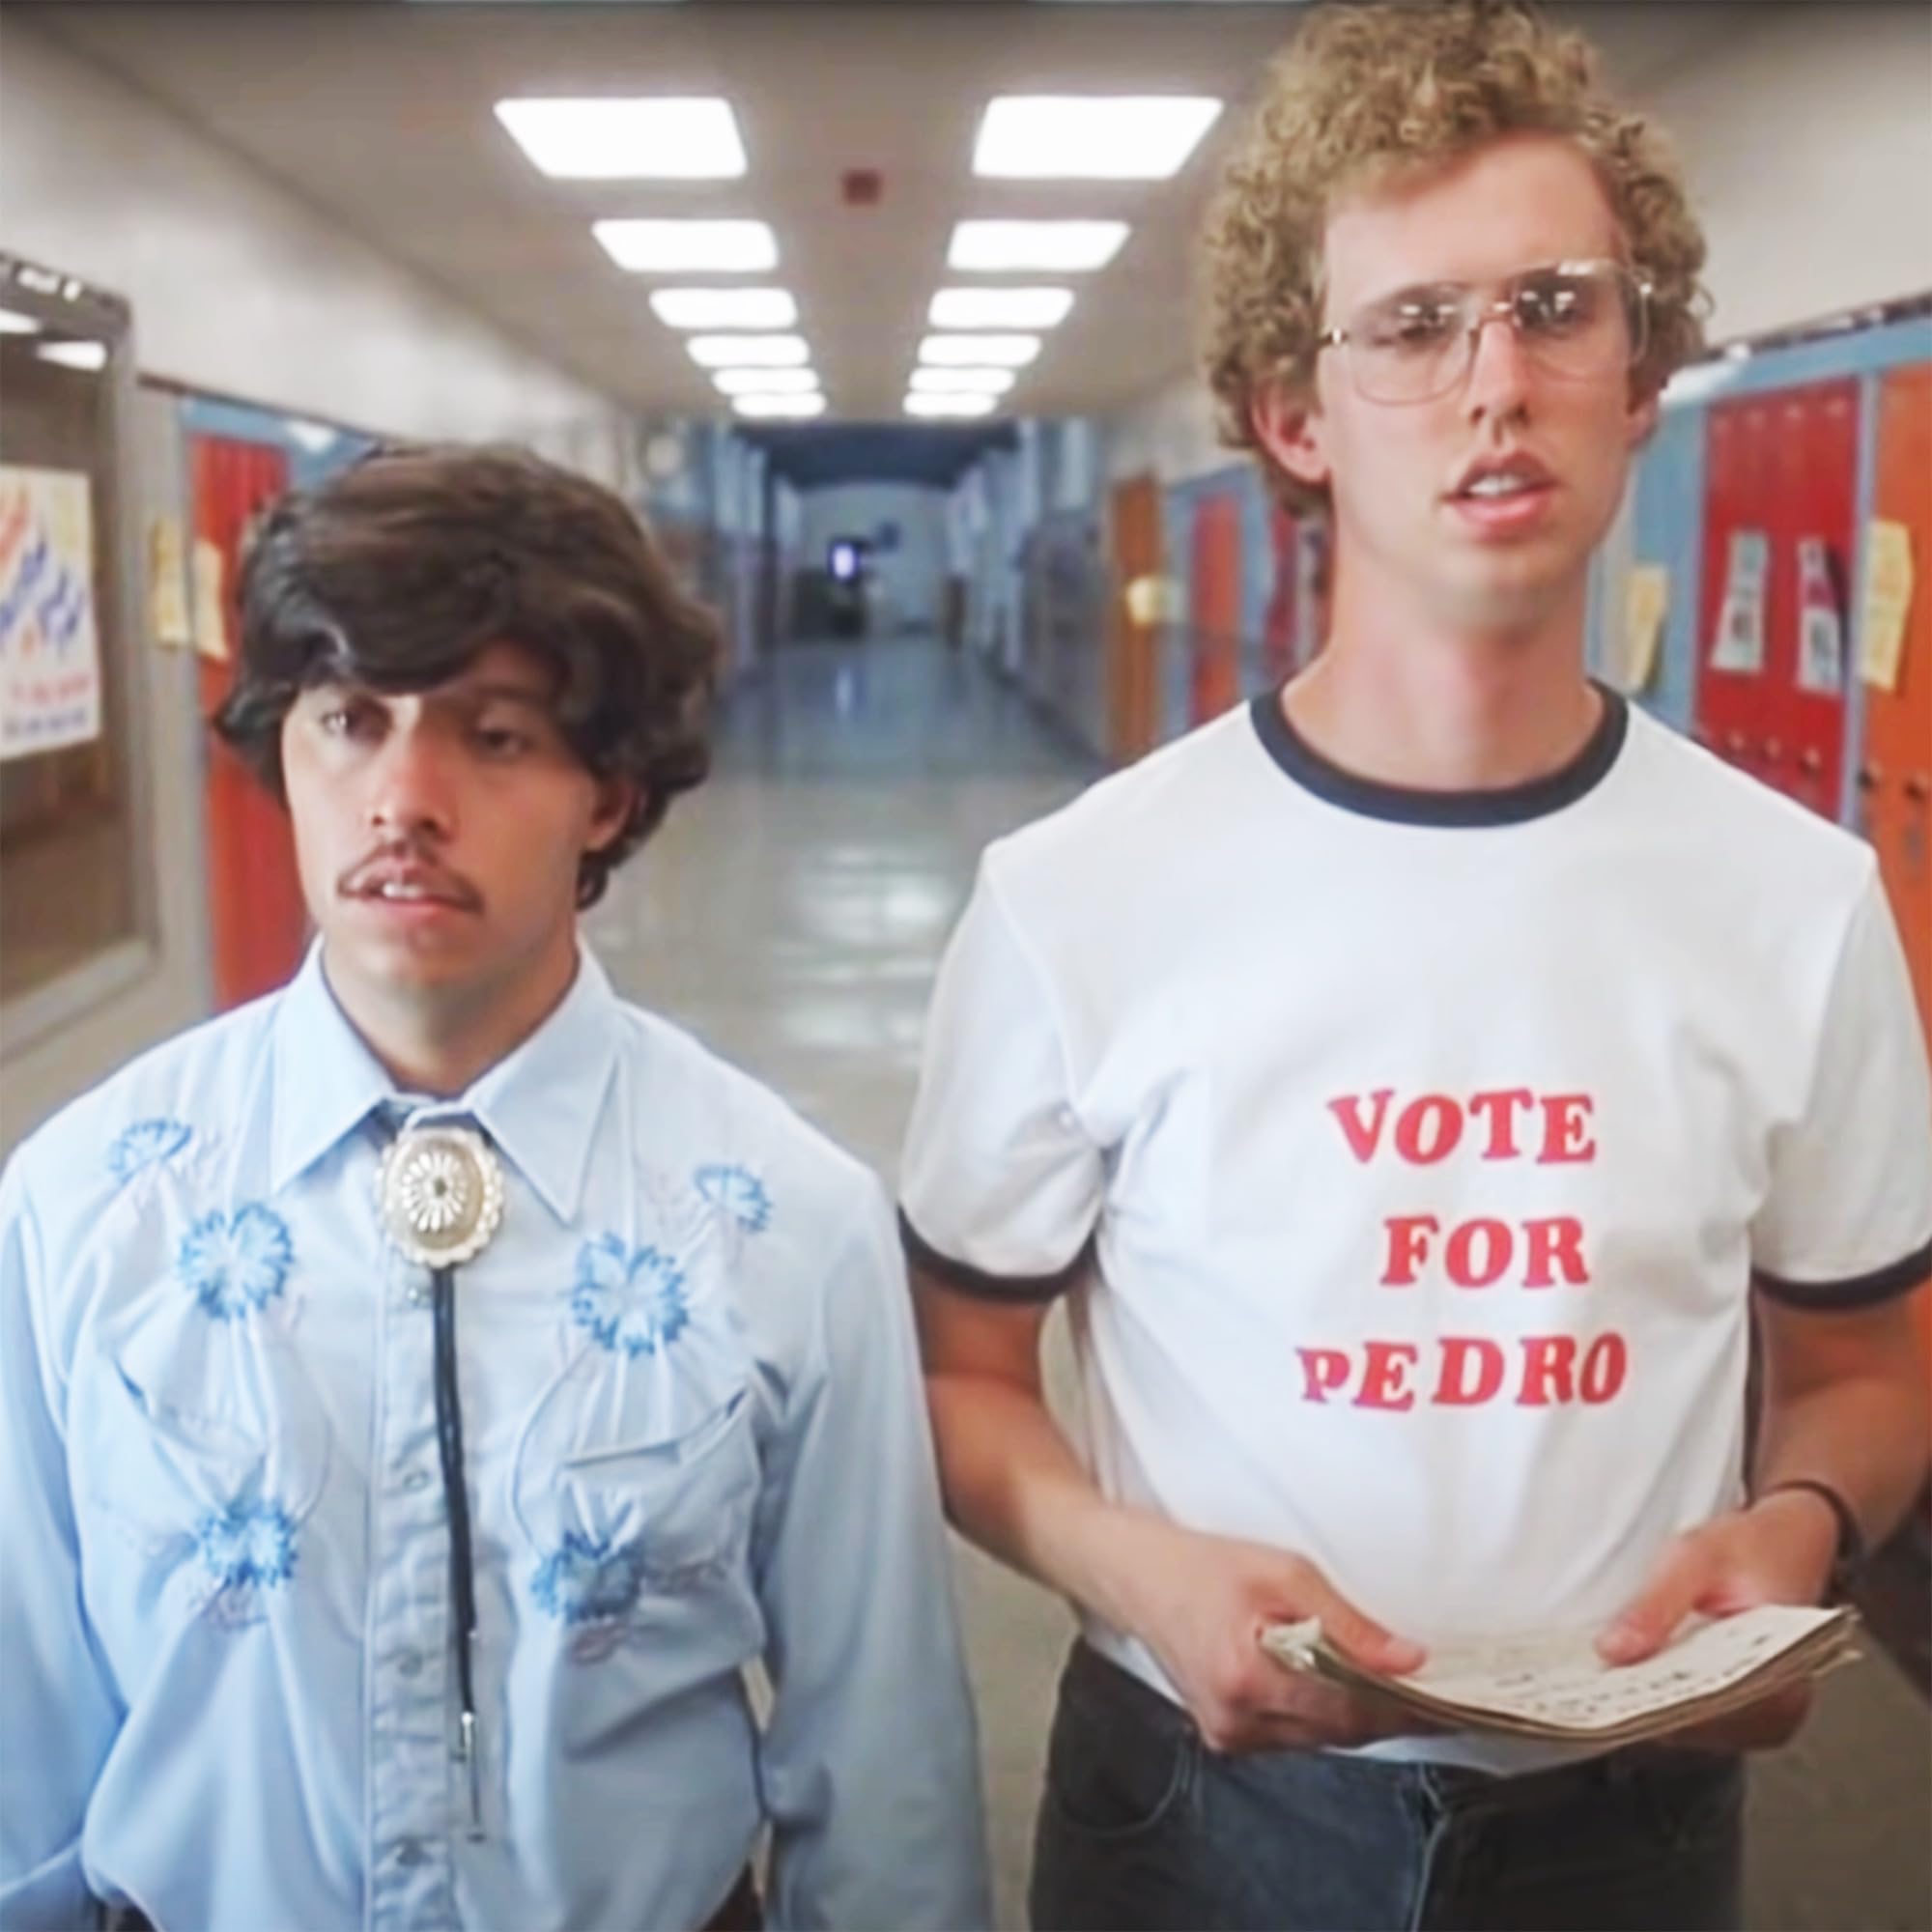 DIRTYRAGZ Men's Vote for Pedro T-Shirt, Napoleon Dynamite Costume Graphic Tee Shirt from